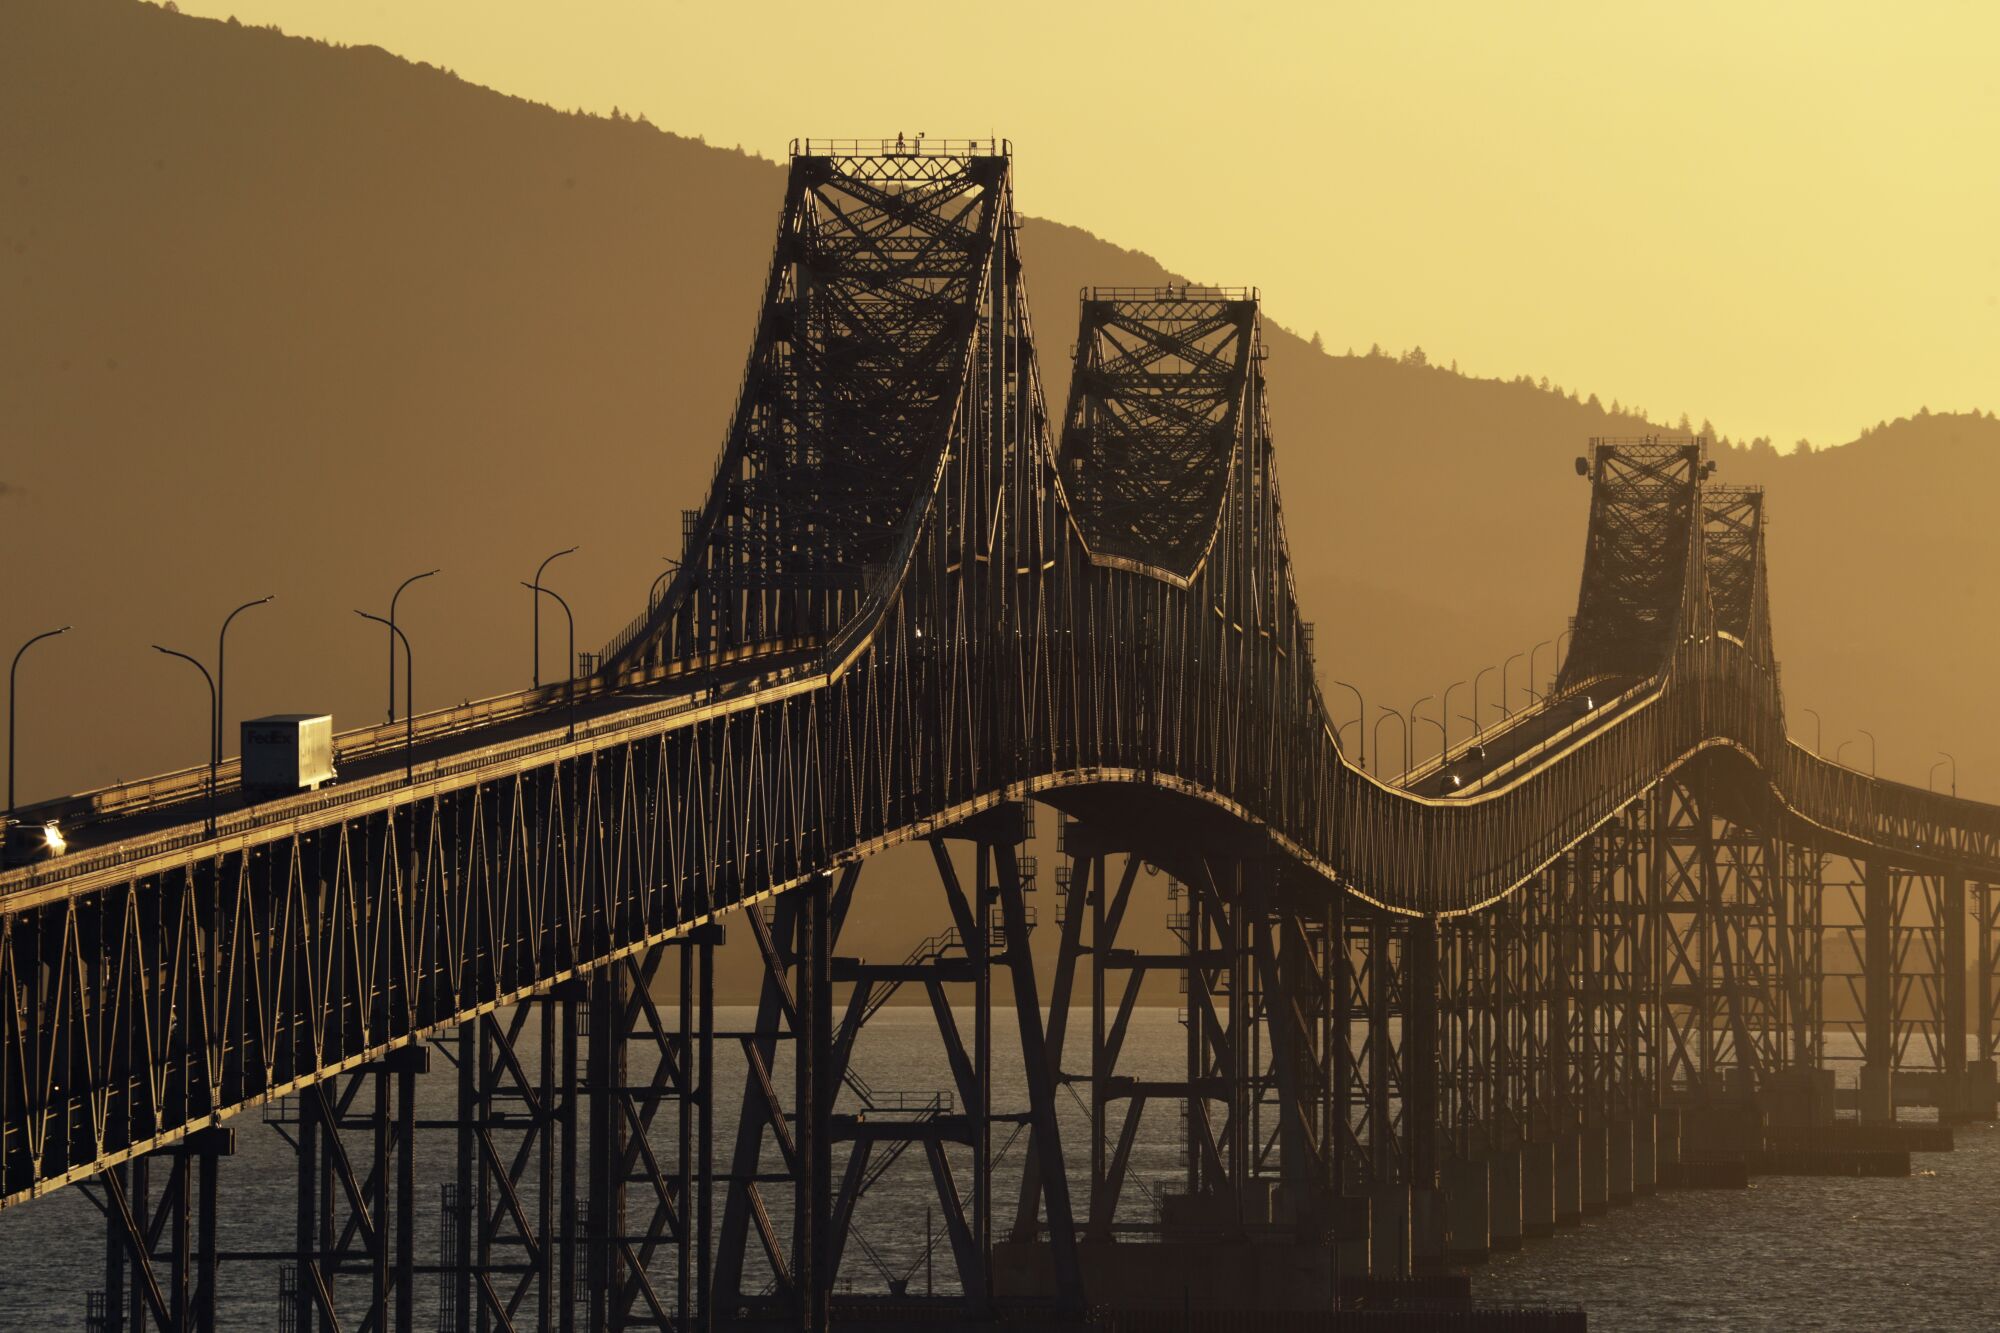 The Richmond-San Rafael Bridge against silhouetted hills and a canary yellow sky